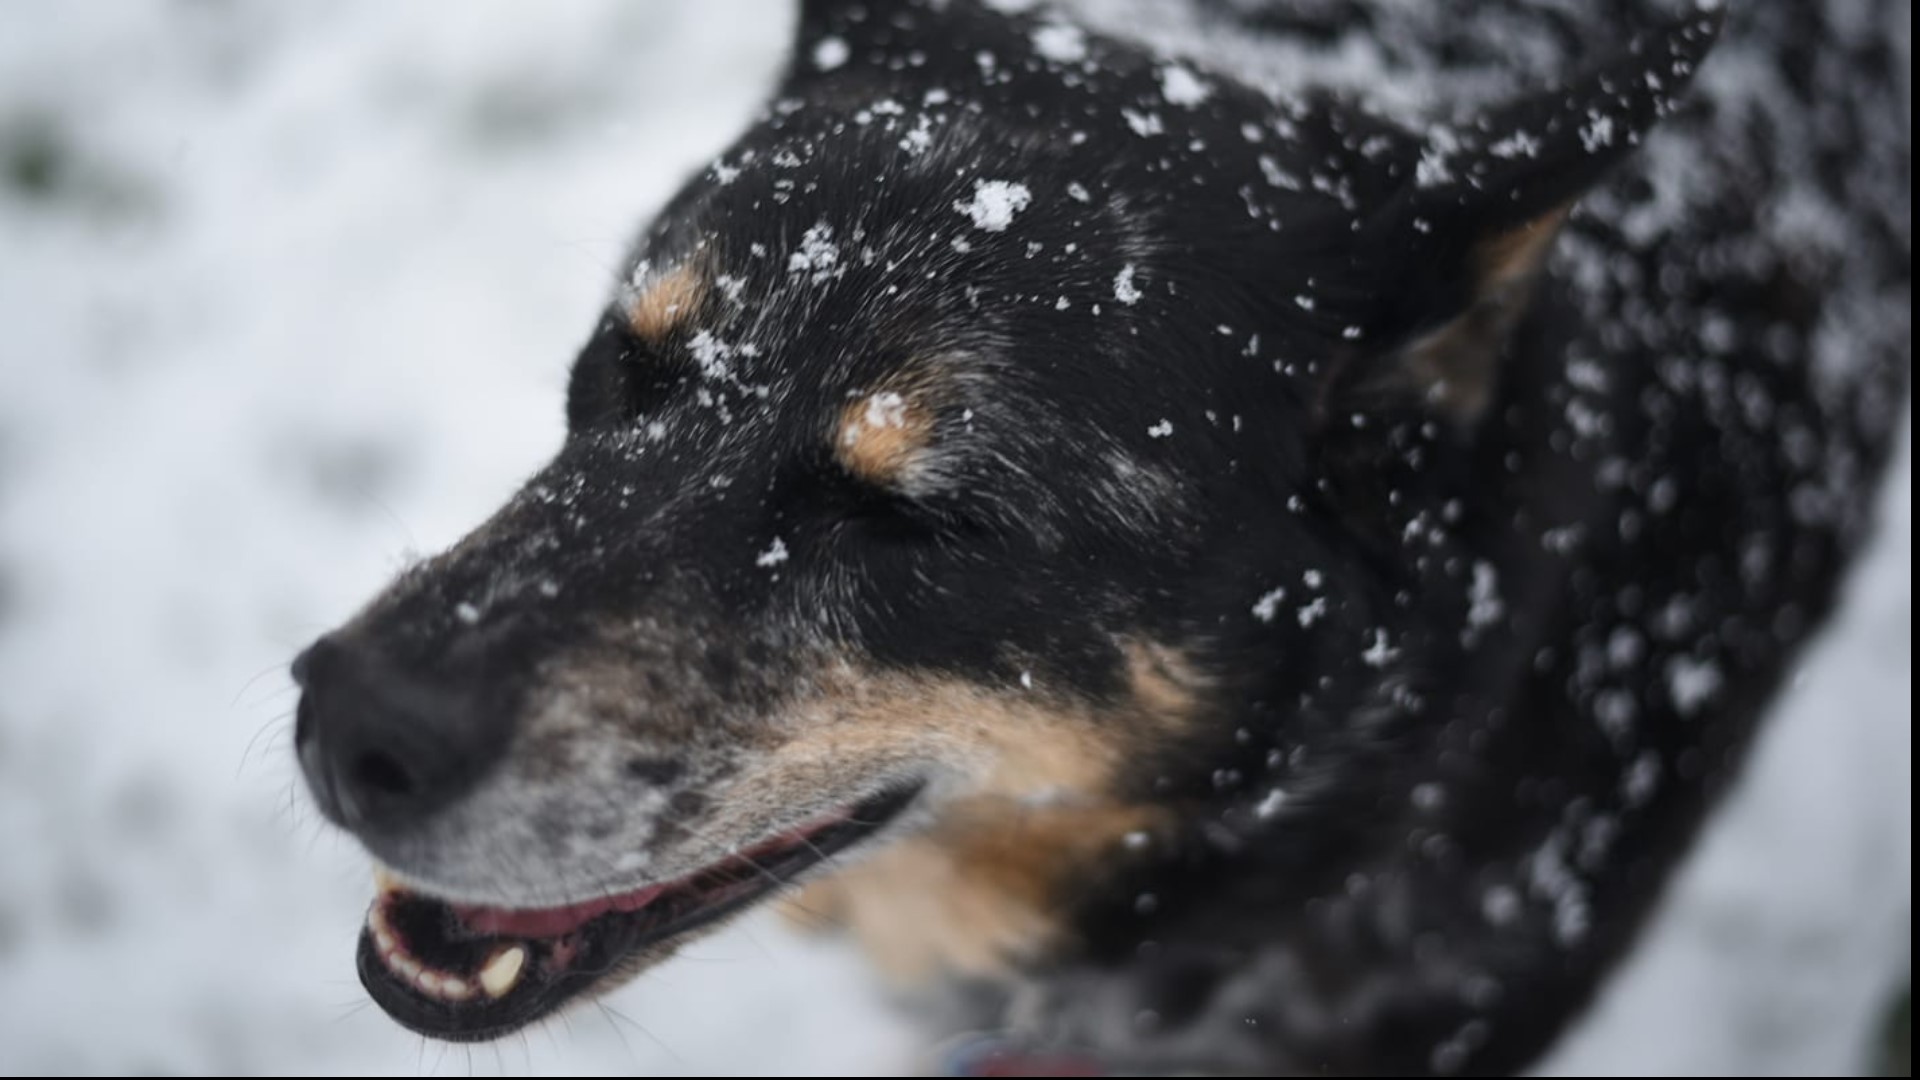 The Human Society of the U.S. offers tips to protect your pet during intense winter weather.